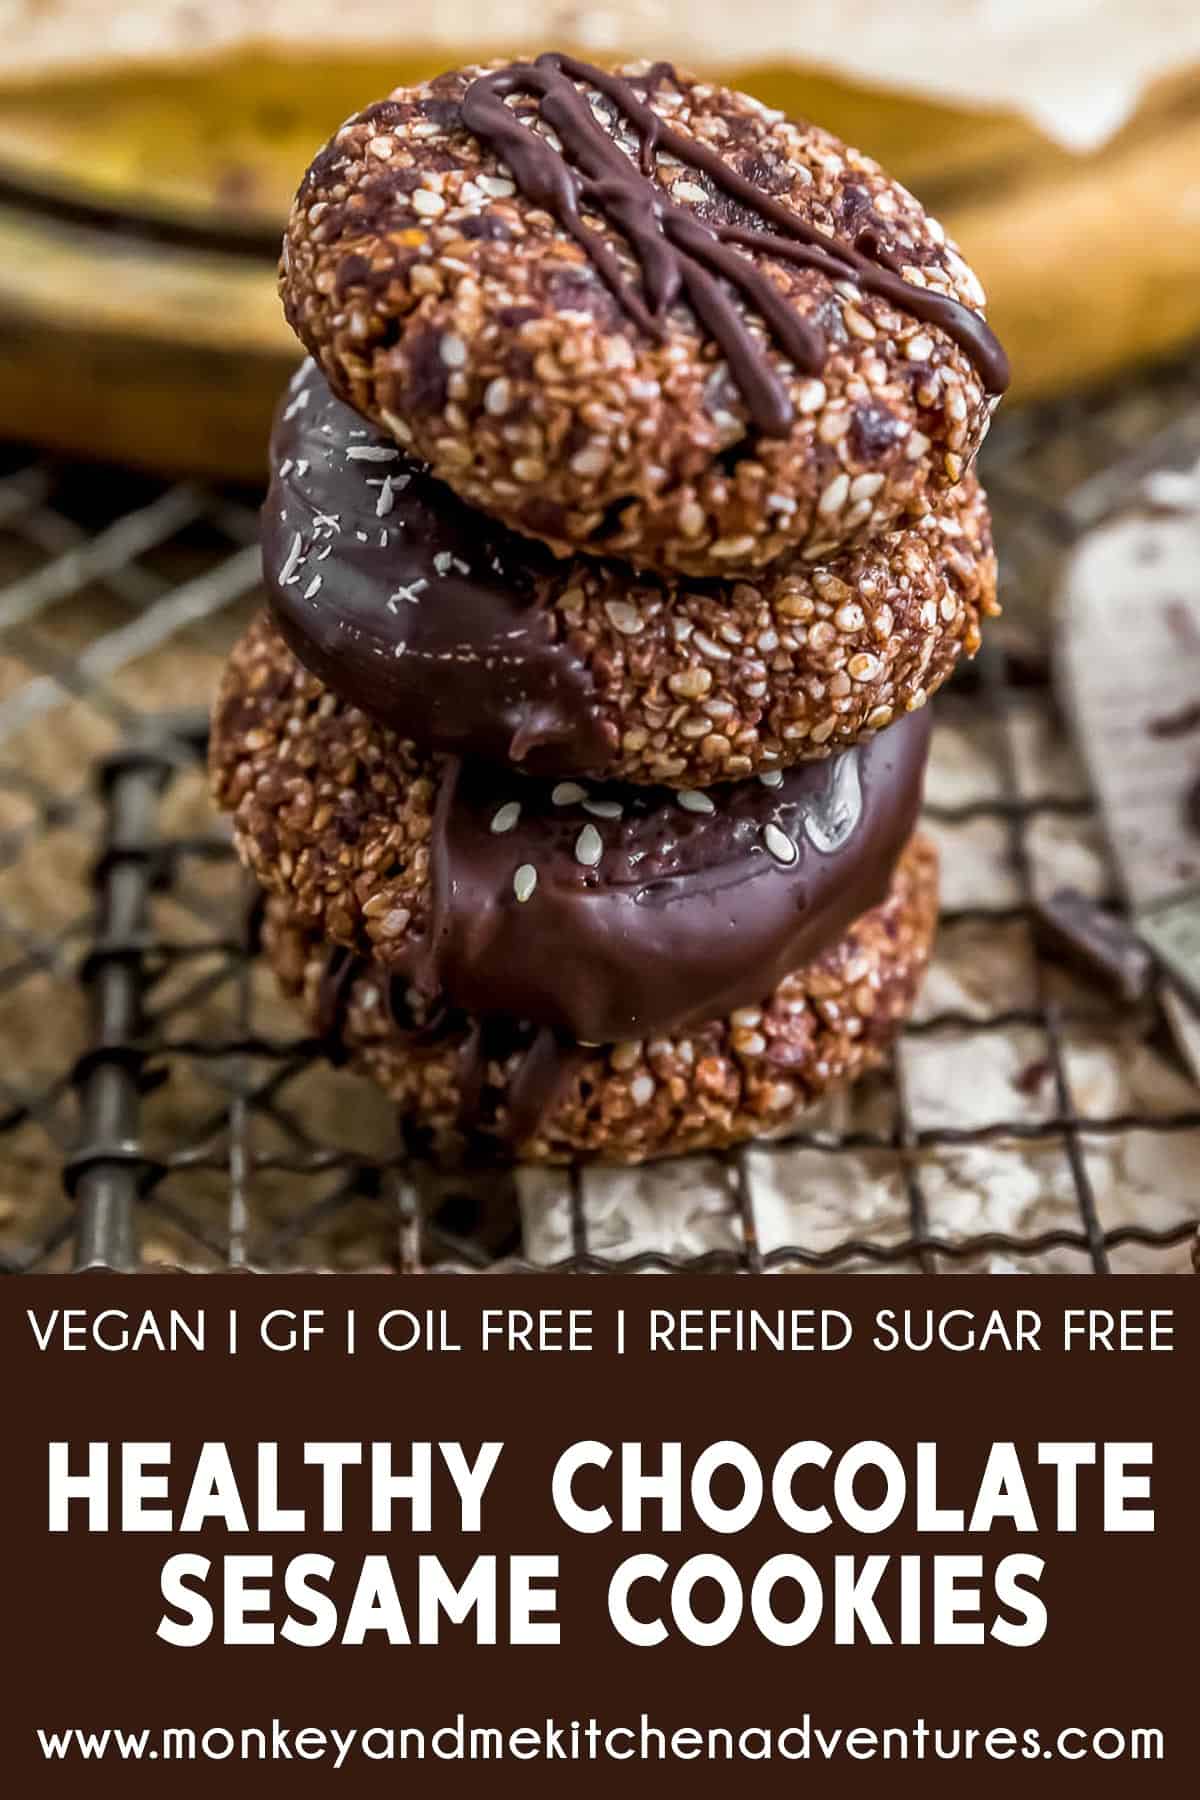 Healthy Chocolate Sesame Cookies with text description